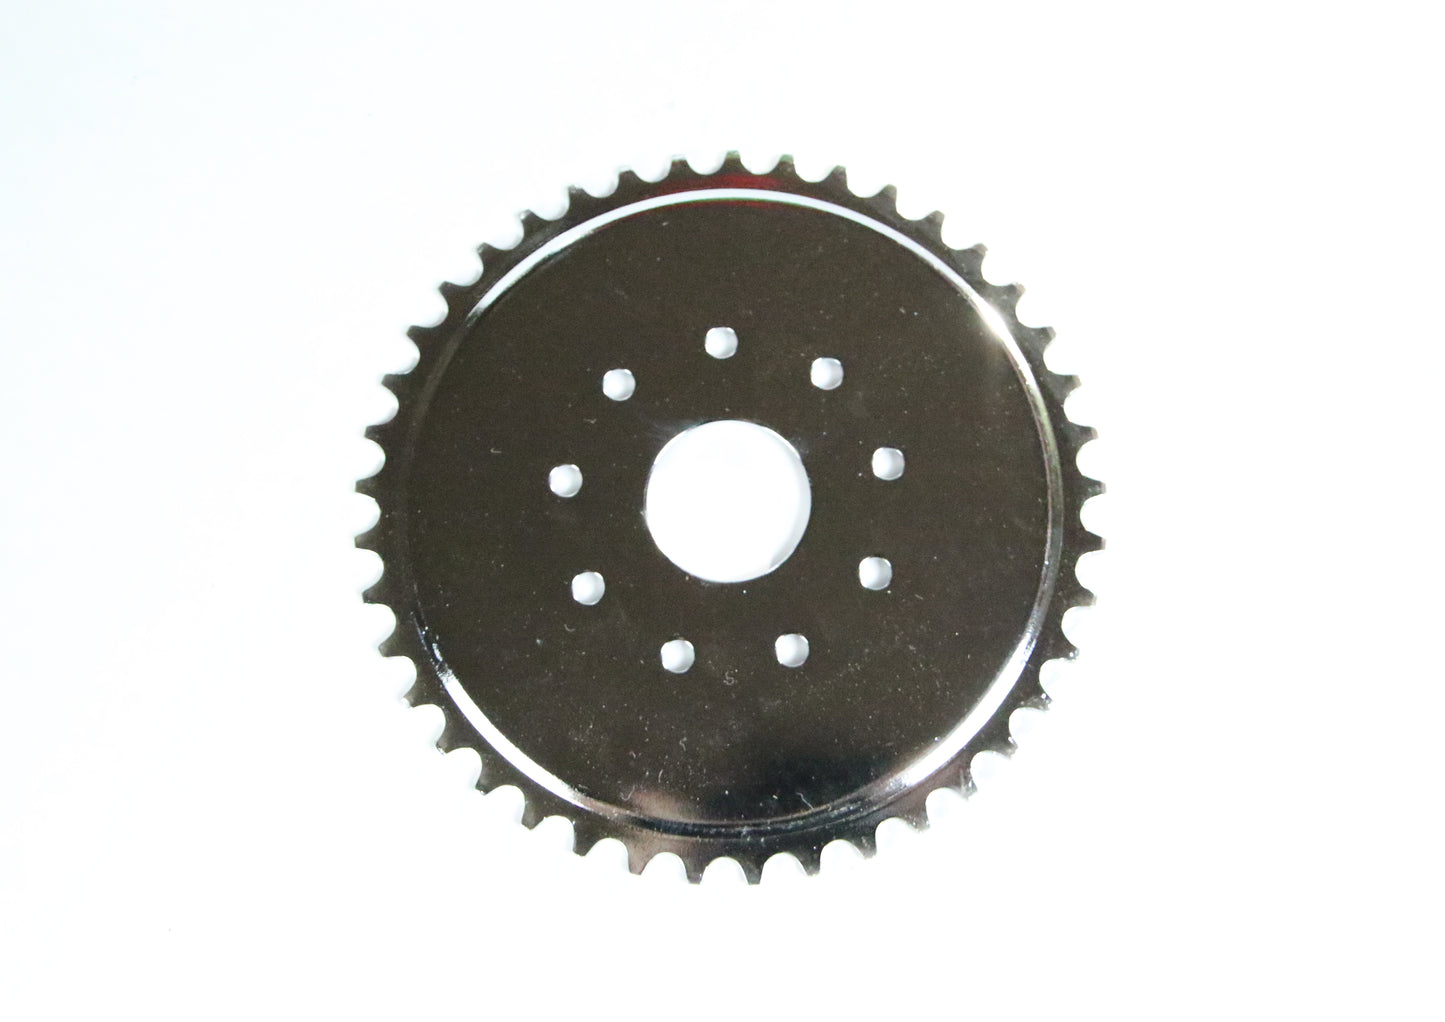 Motorized bicycle 41 tooth sprocket and hardware